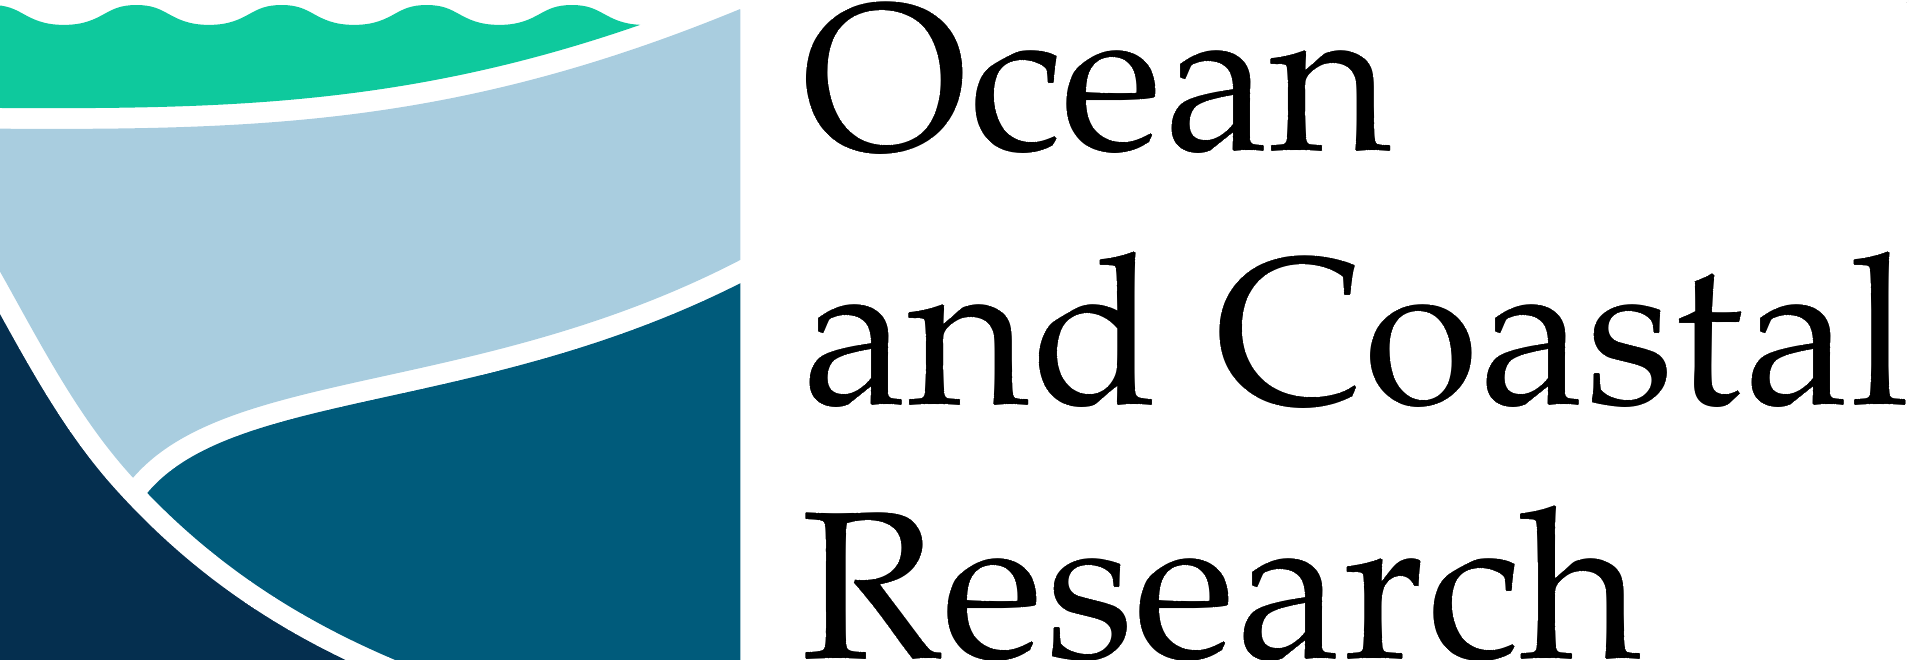 Ocean and Coastal Research